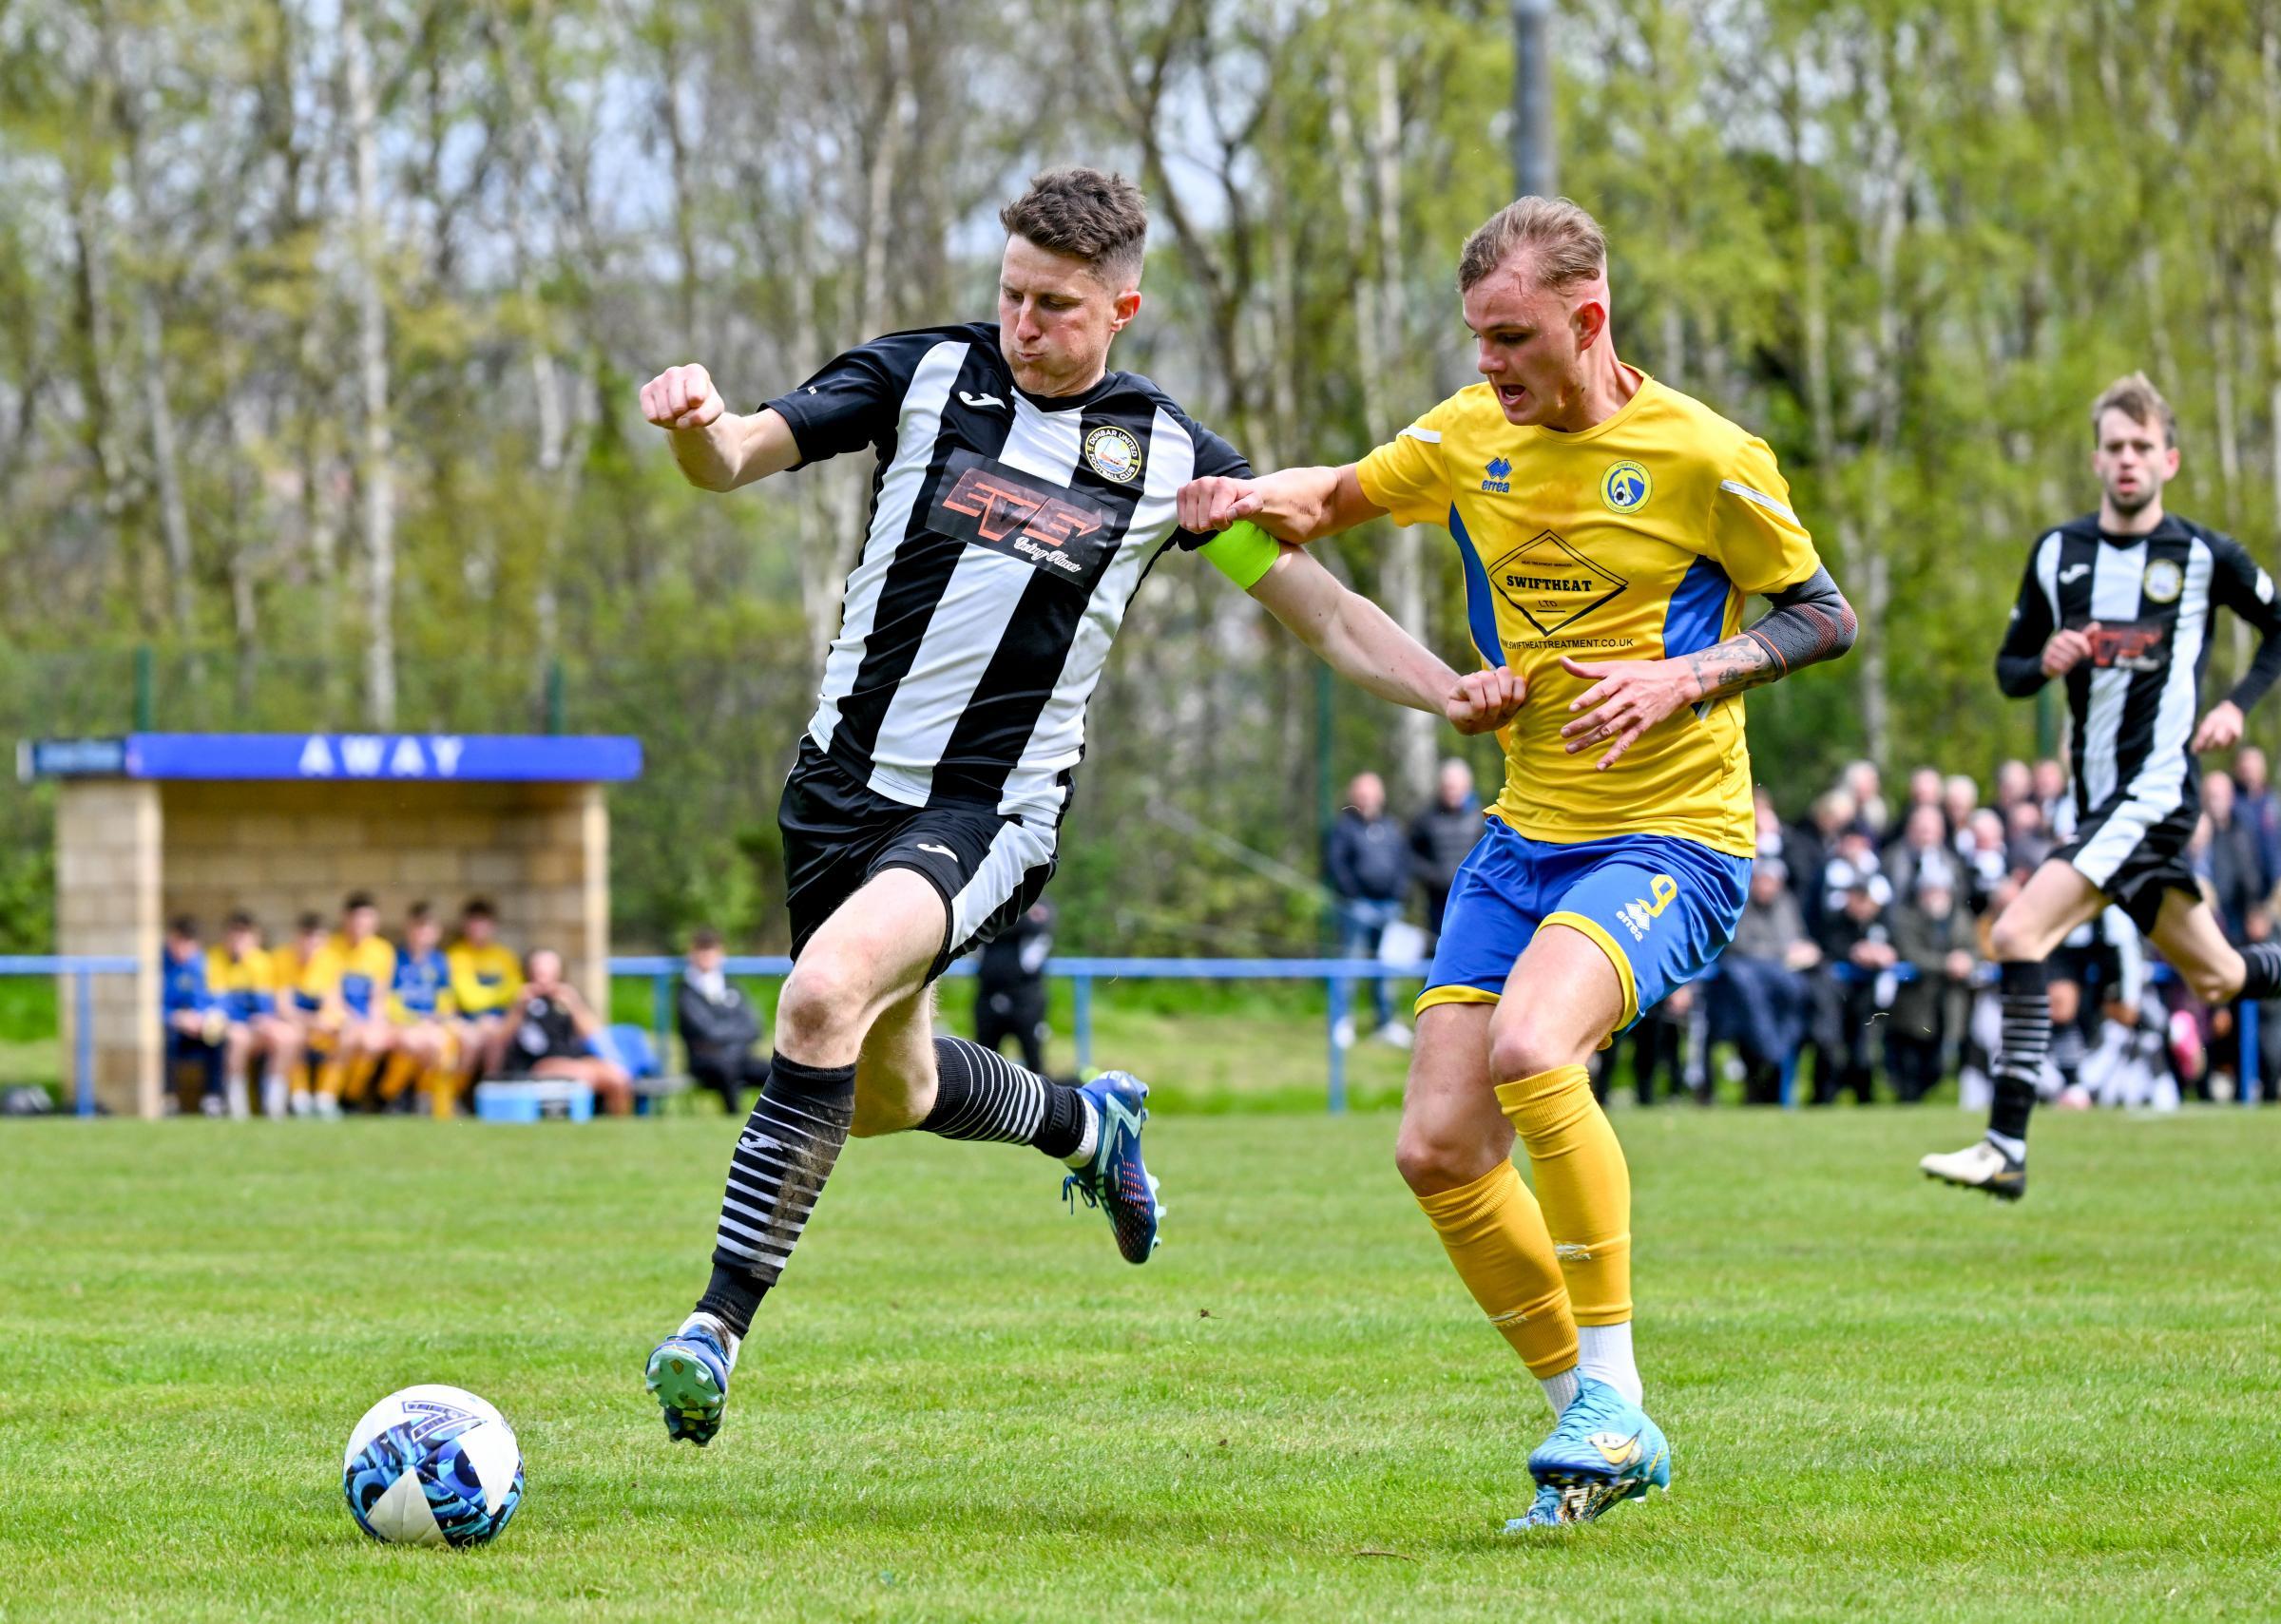 Dunbar United (black and white) head to Glenrothes. Image: Alan Wilson.